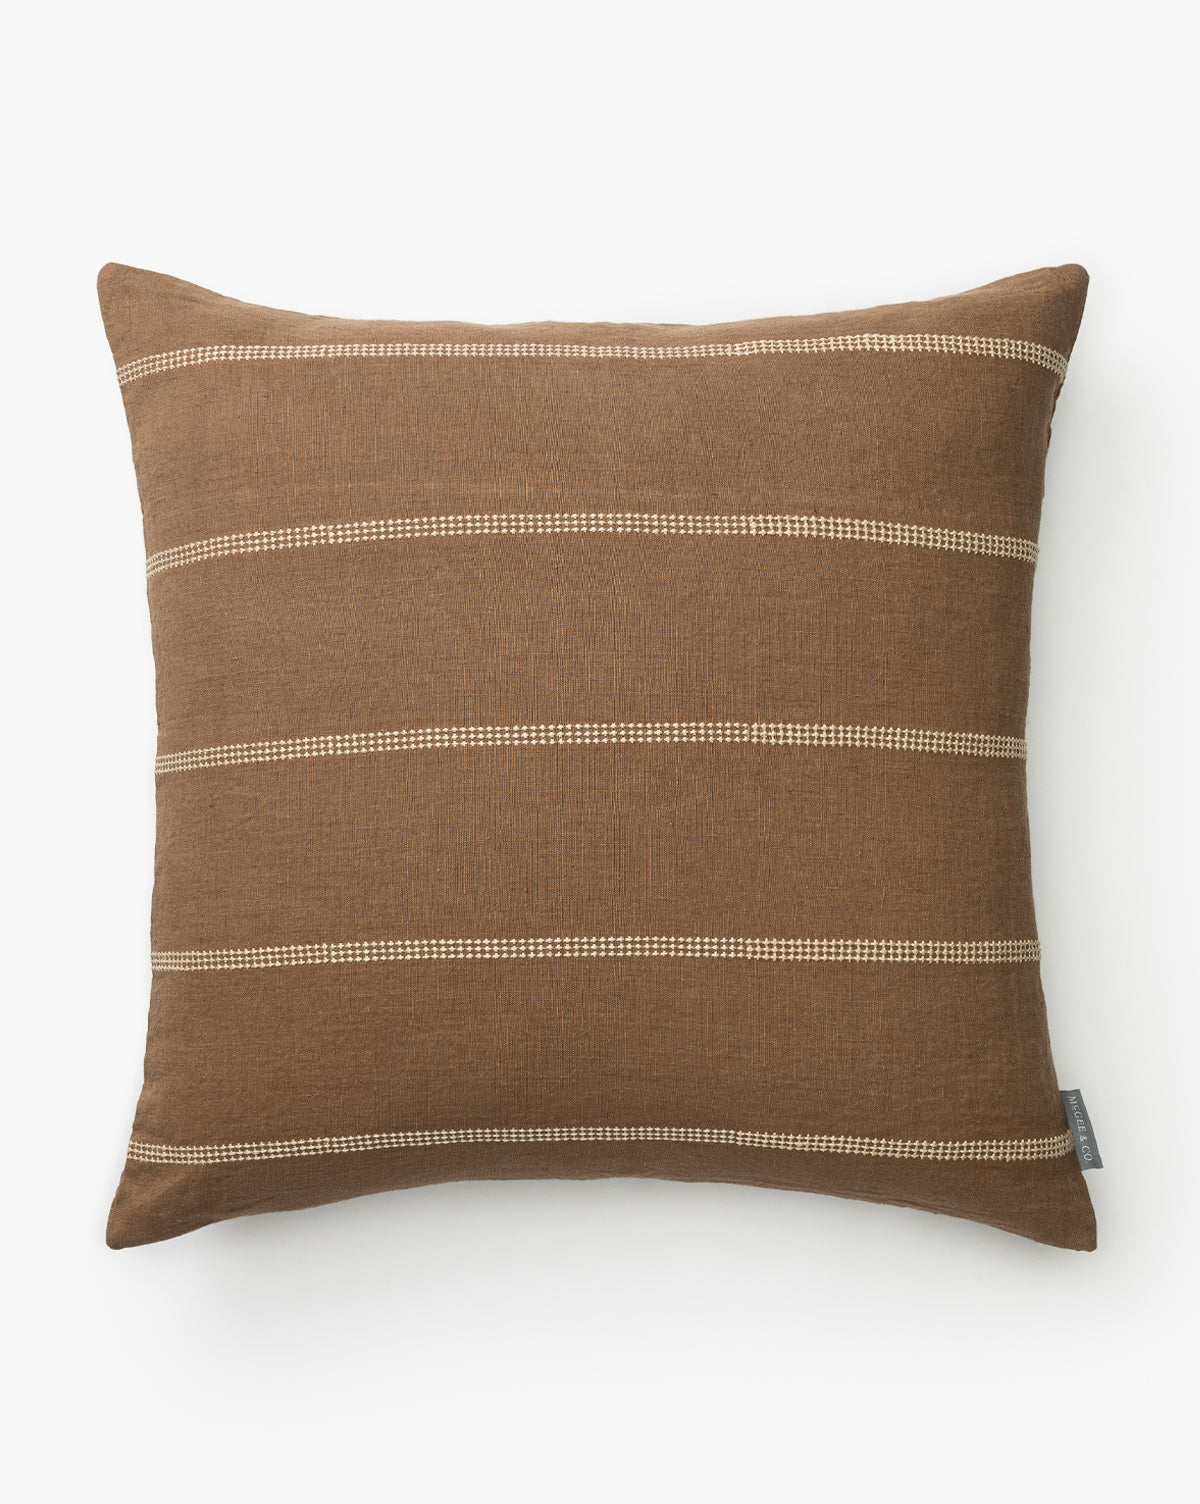 East India, Ryder Pillow Cover